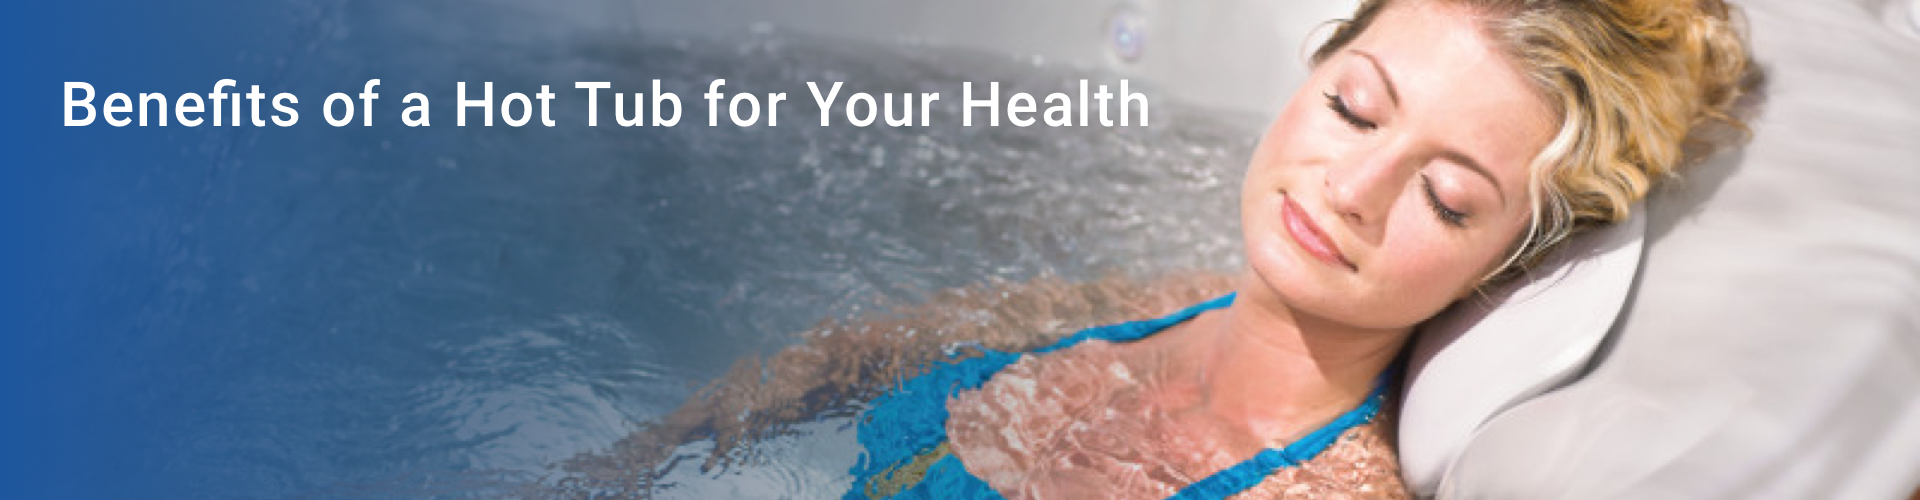 Benefits of a Hot Tub for Your Health